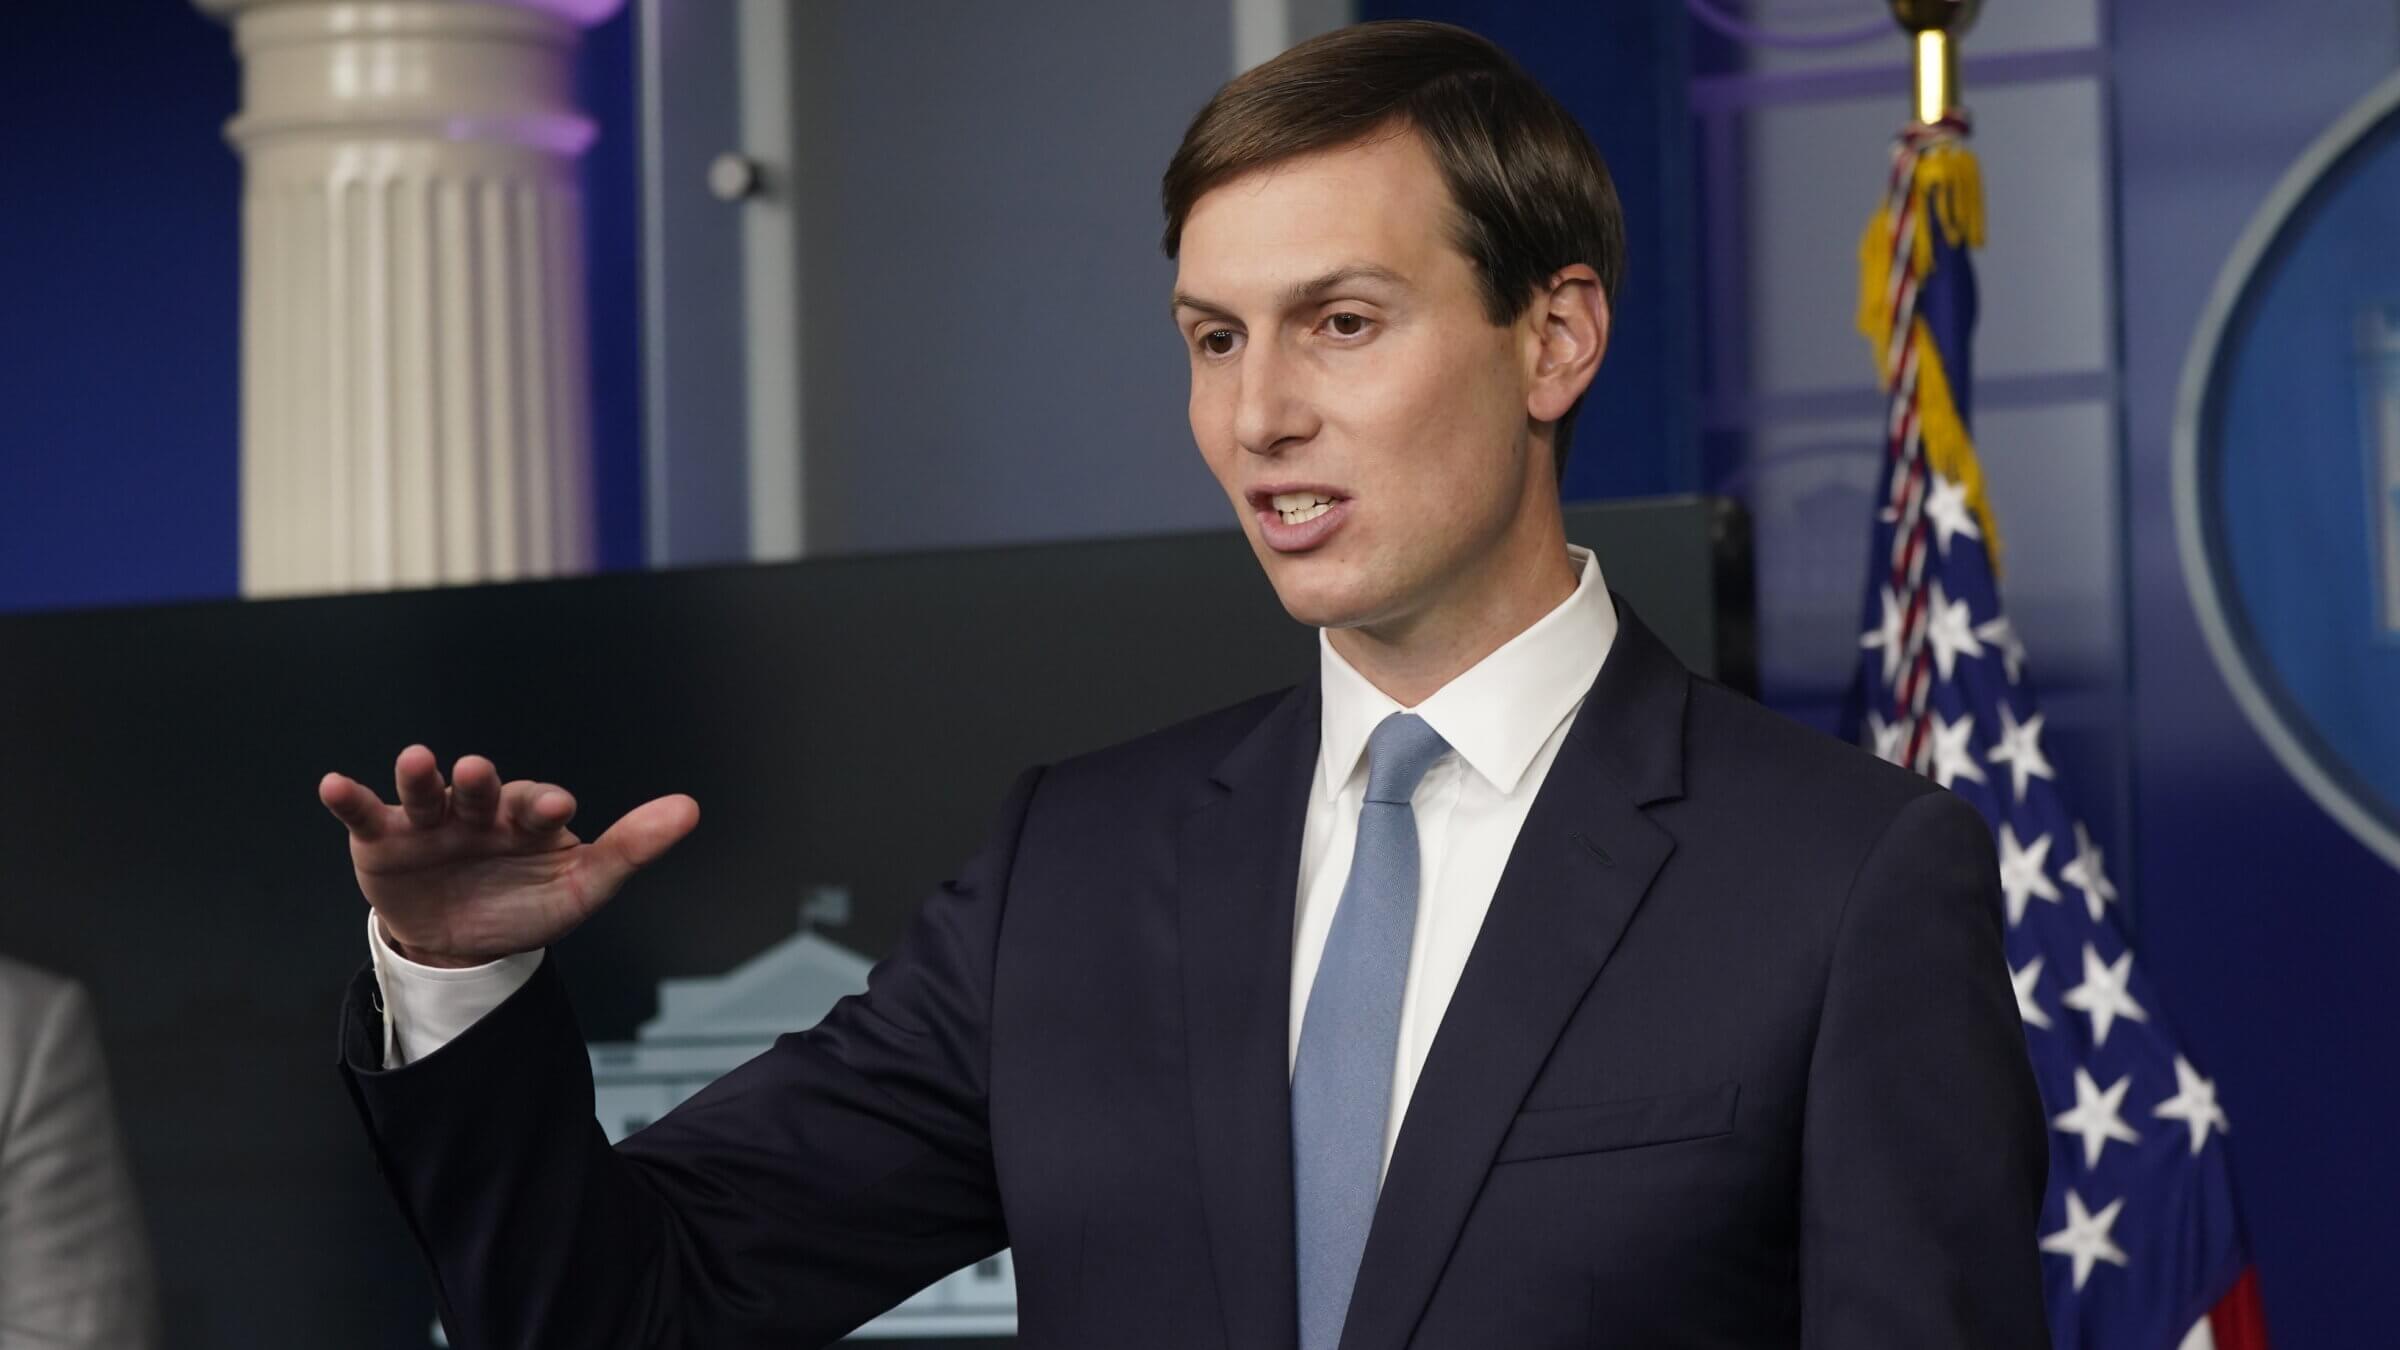 During the press conference, Jared Kushner is making statements while raising his right hand